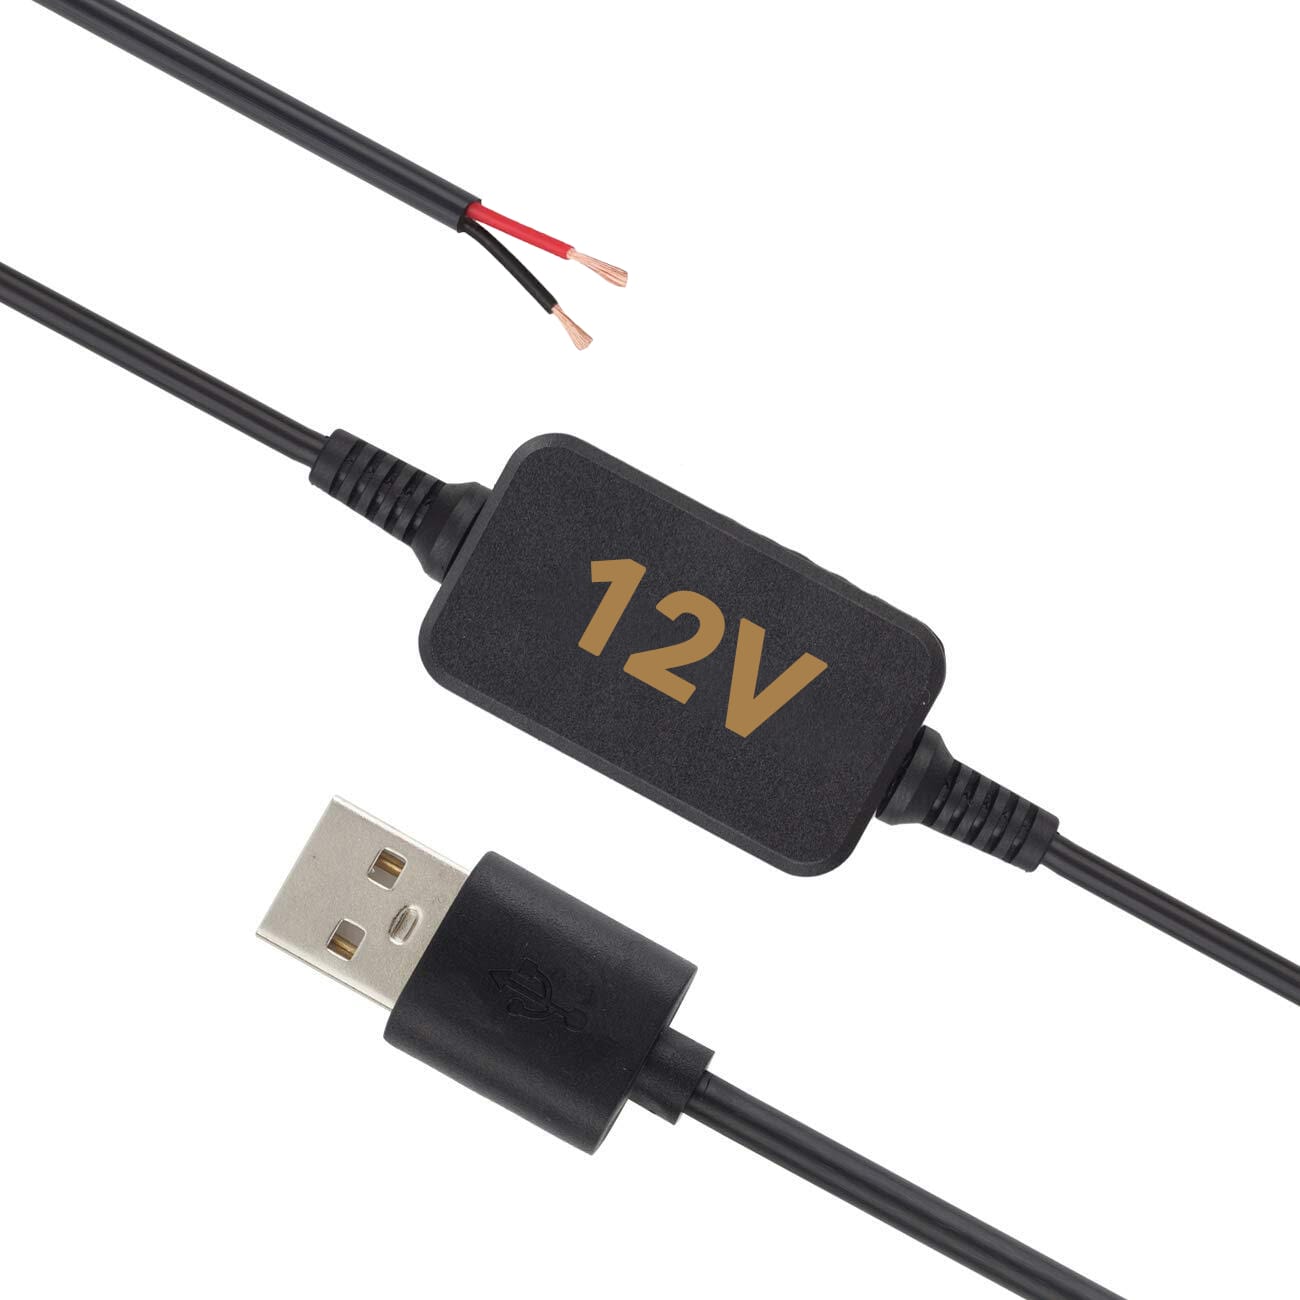 12v power cable